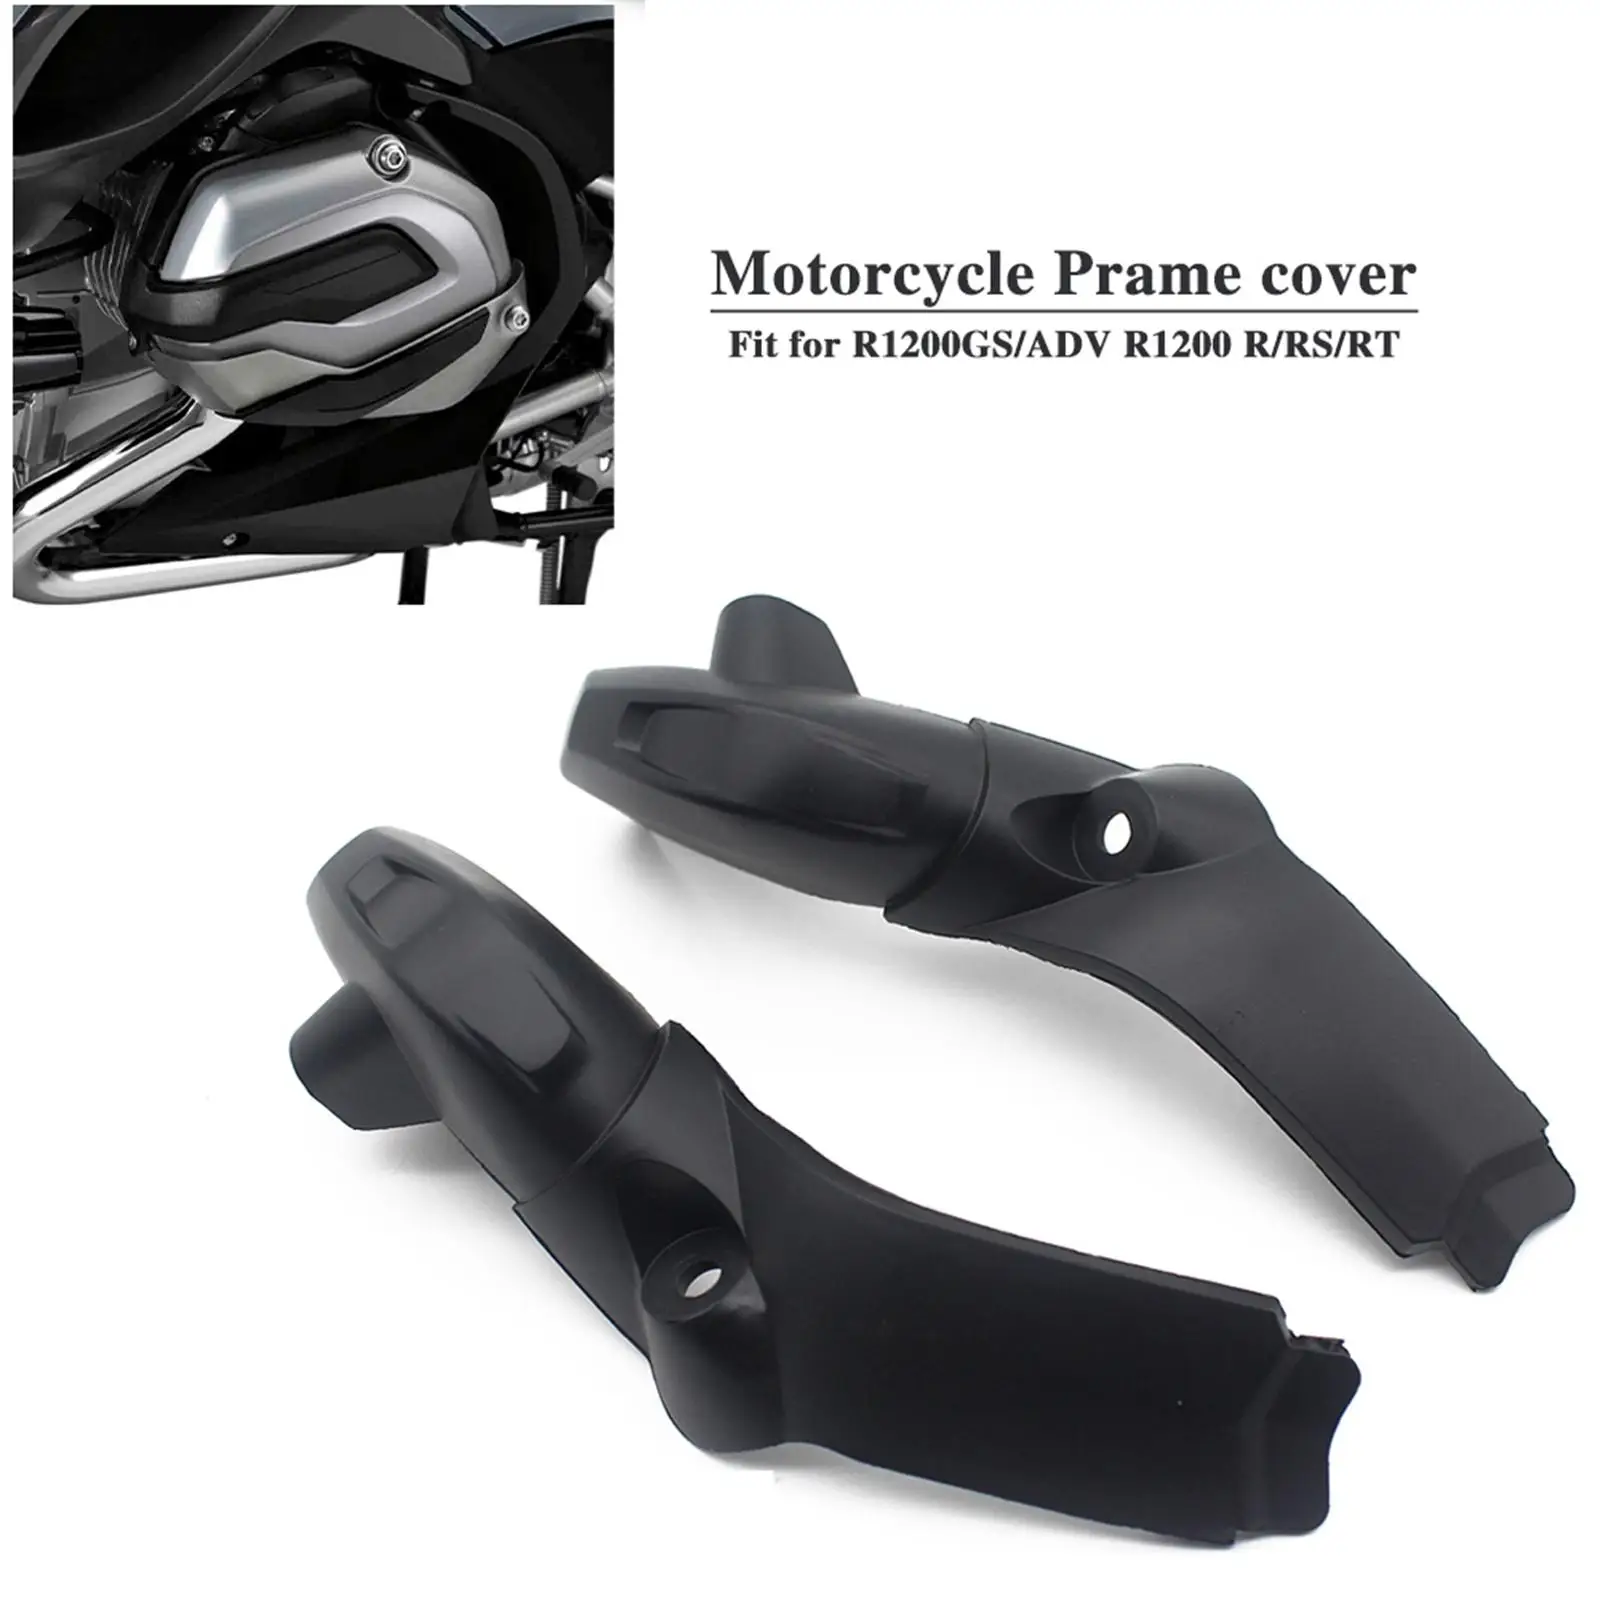 2x Motorcycle Ignition Coil Spark Plug Frame Cover Engine Protector Fit for R1200GS R1200 GS R 1200 GS Adv R1200RT R1200R/RS